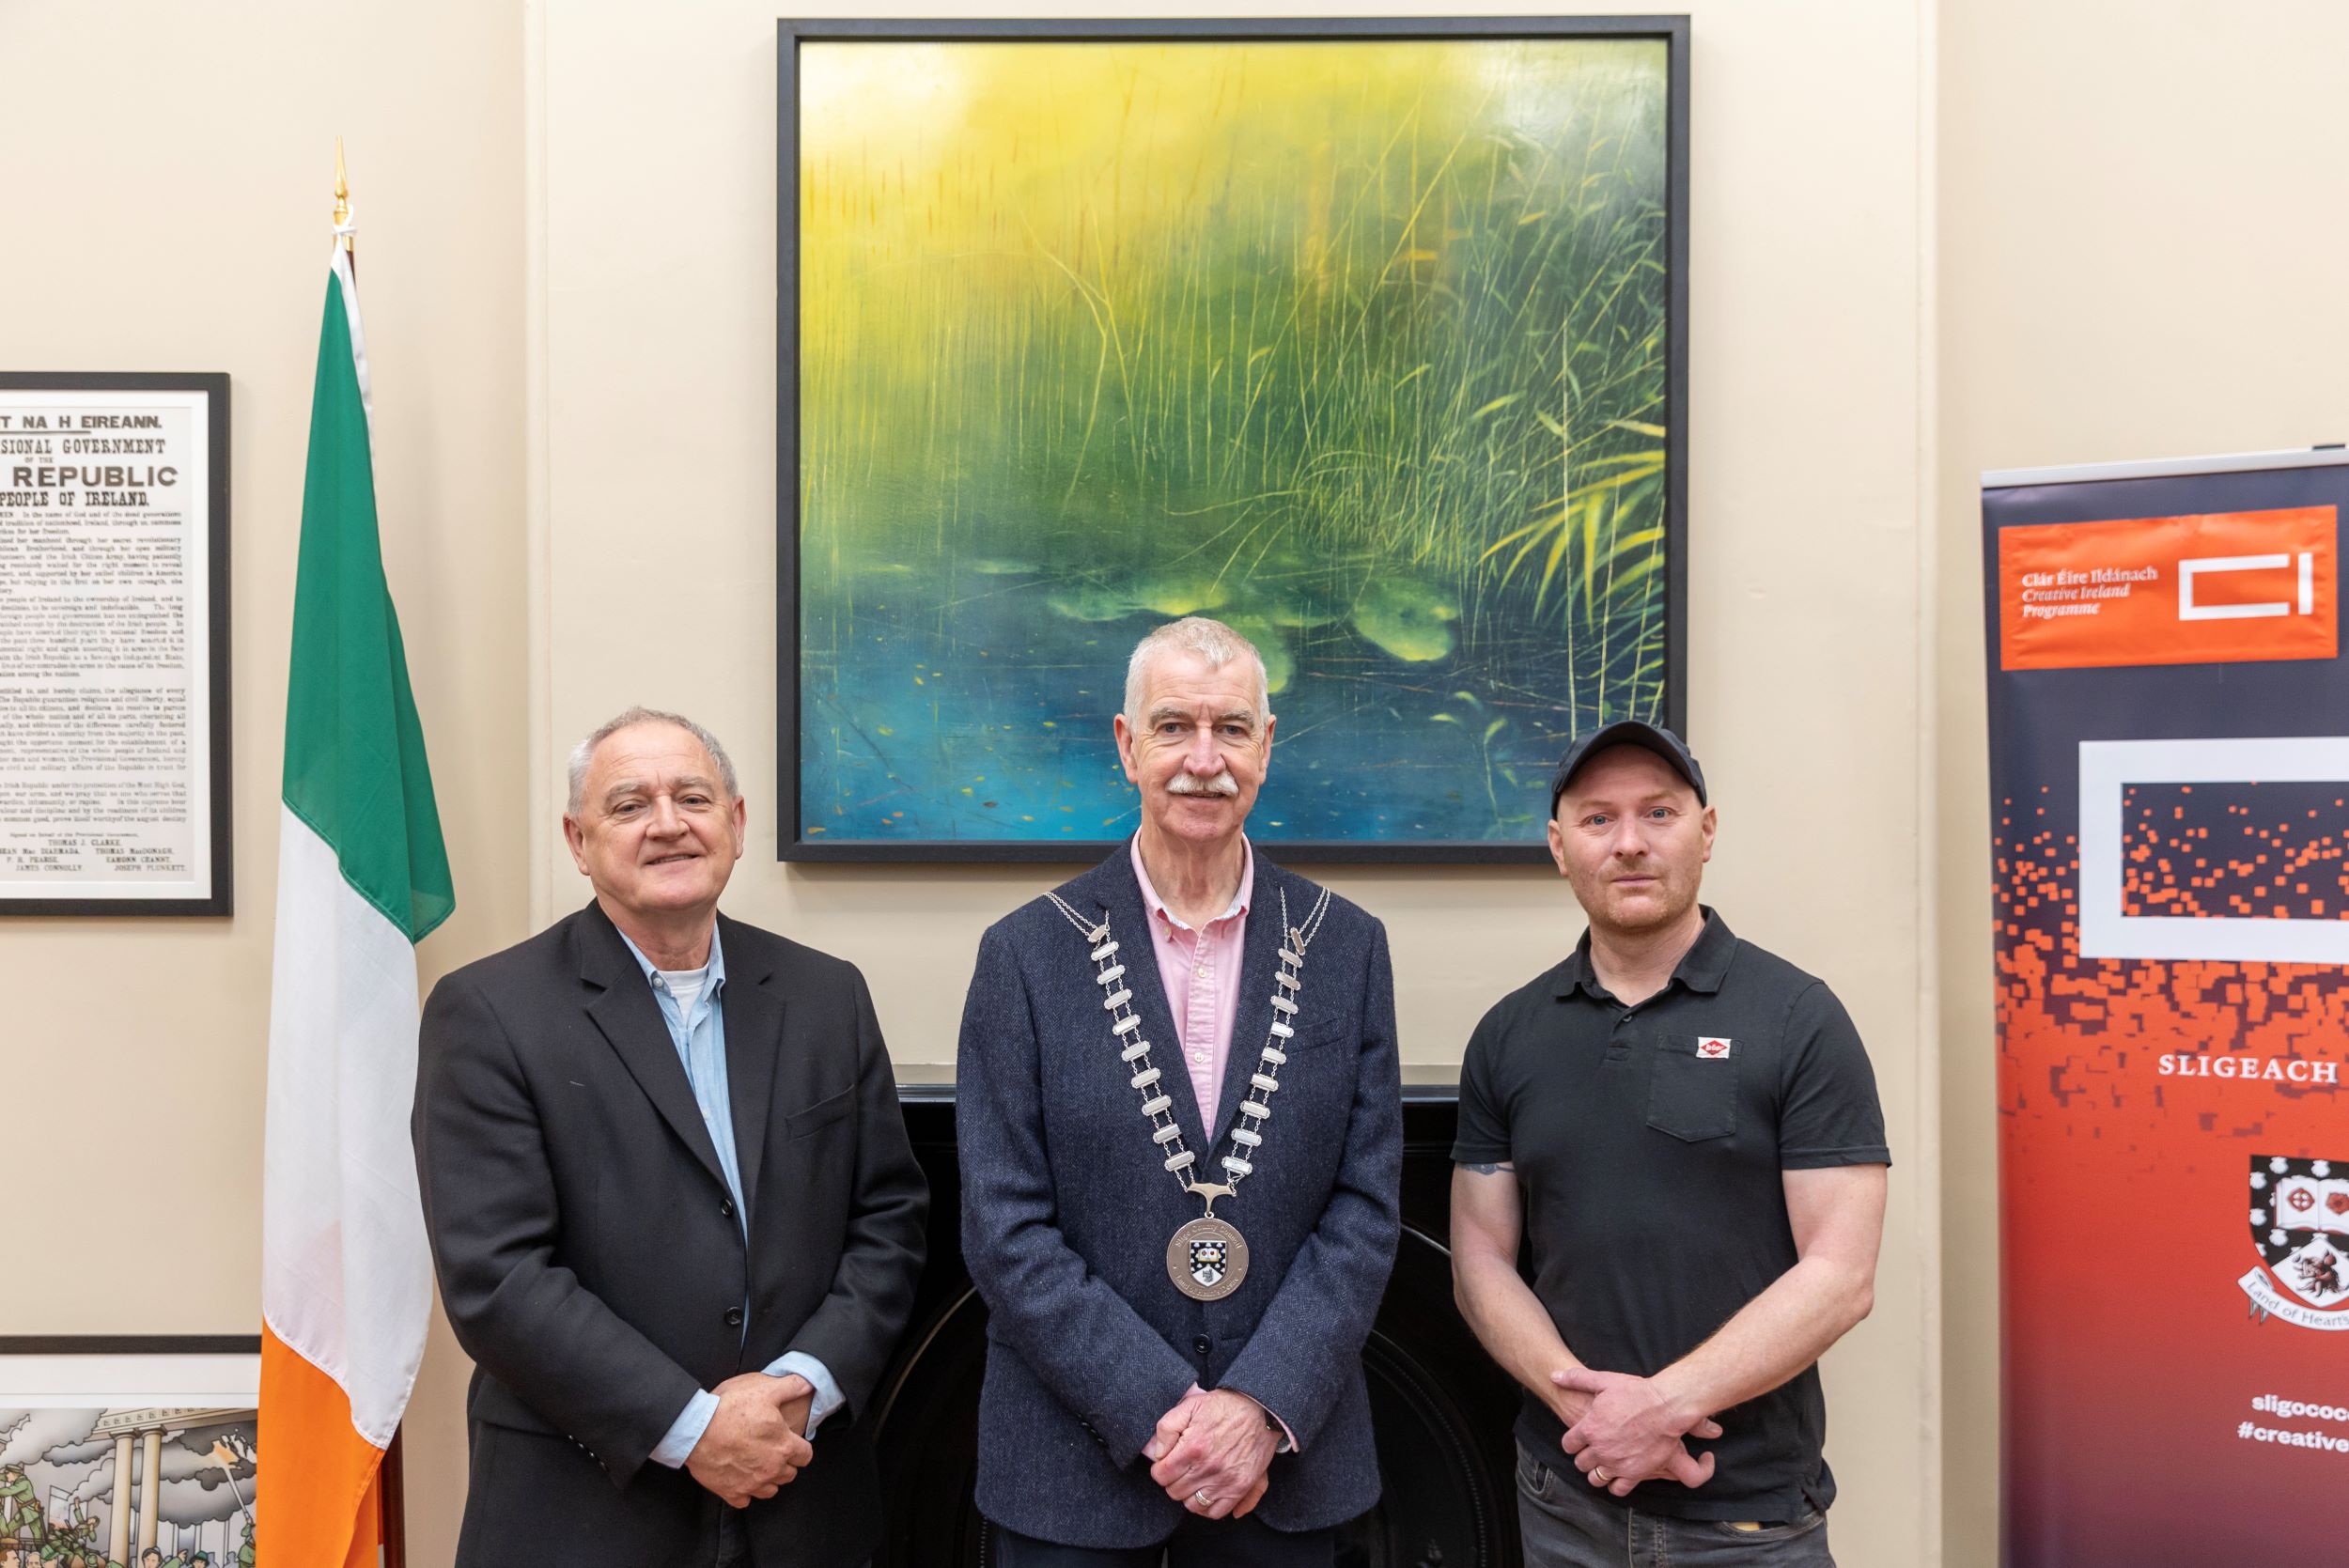 Mayor Councillor Declan Bree unveils artist Daniel Chester’s Creative Ireland commissioned painting “A New Dawn.”